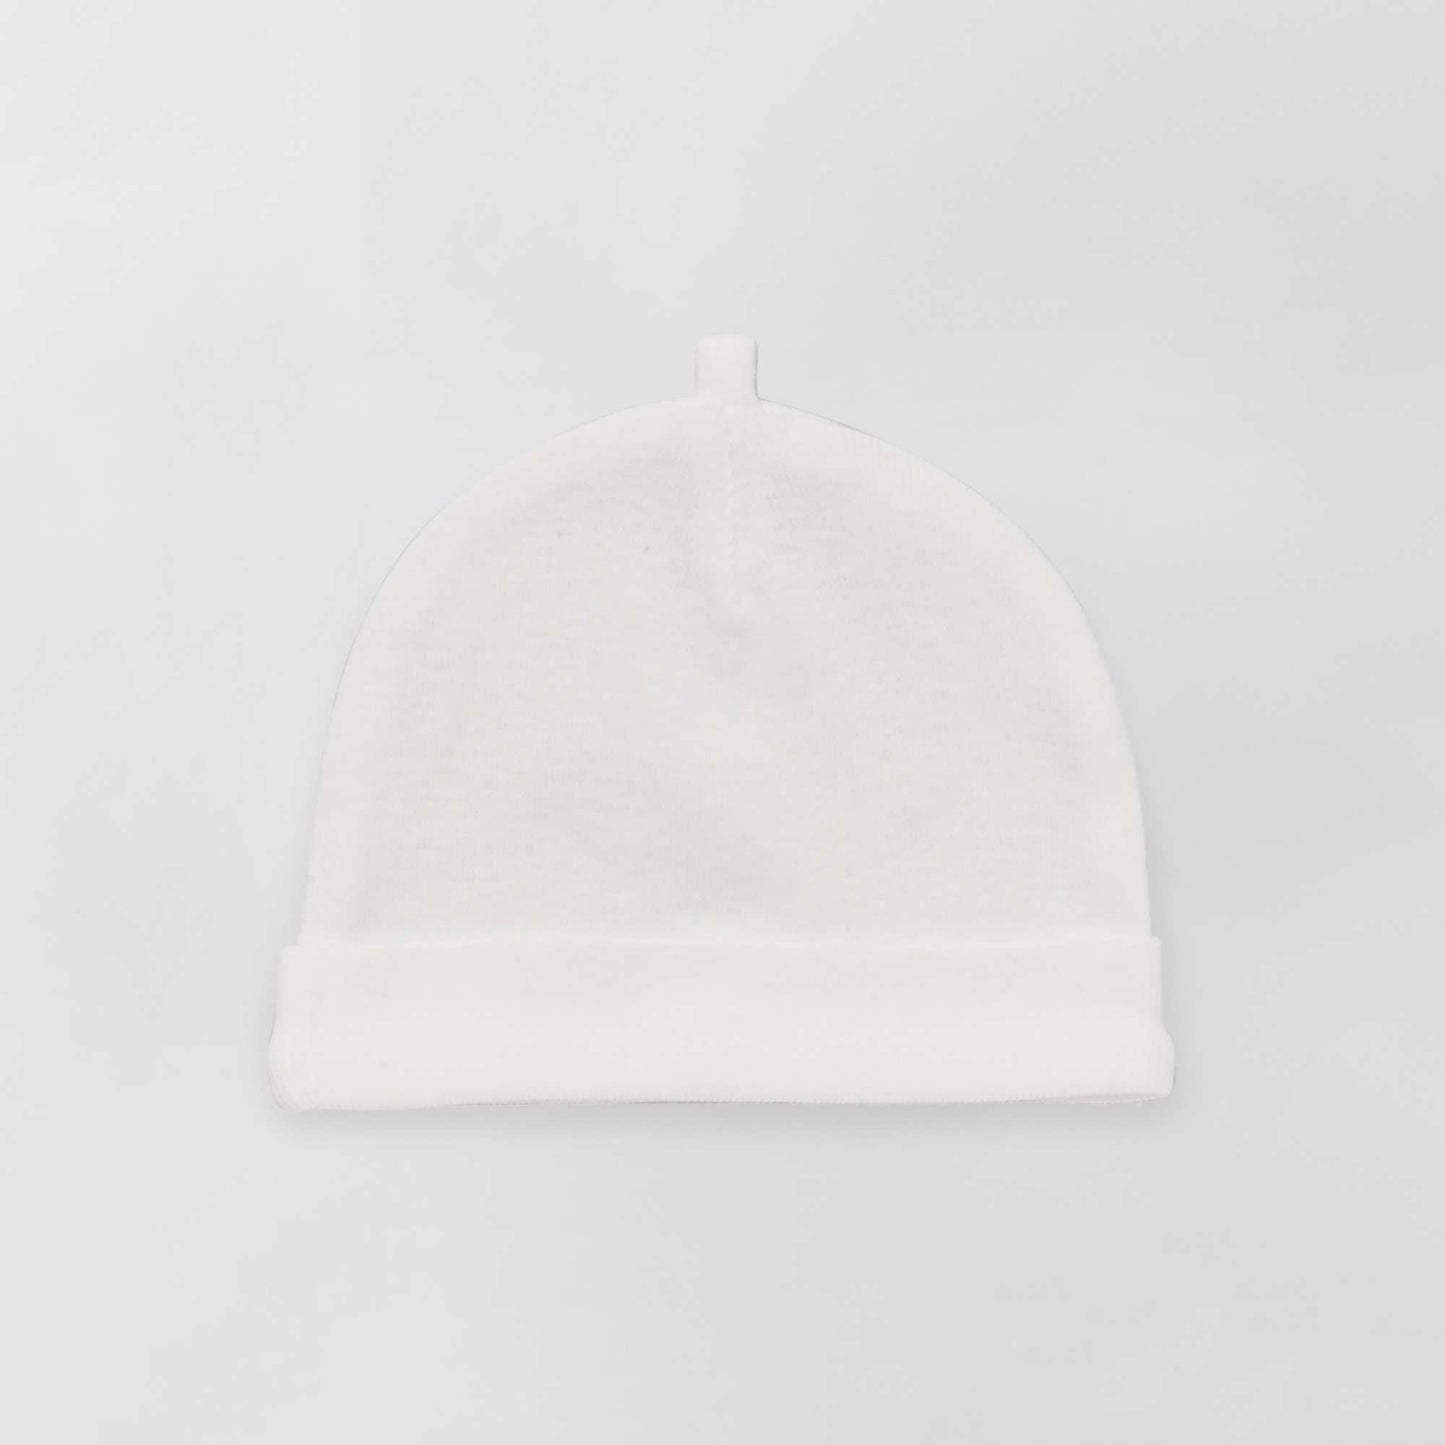 Pack of 2 hats WHITE